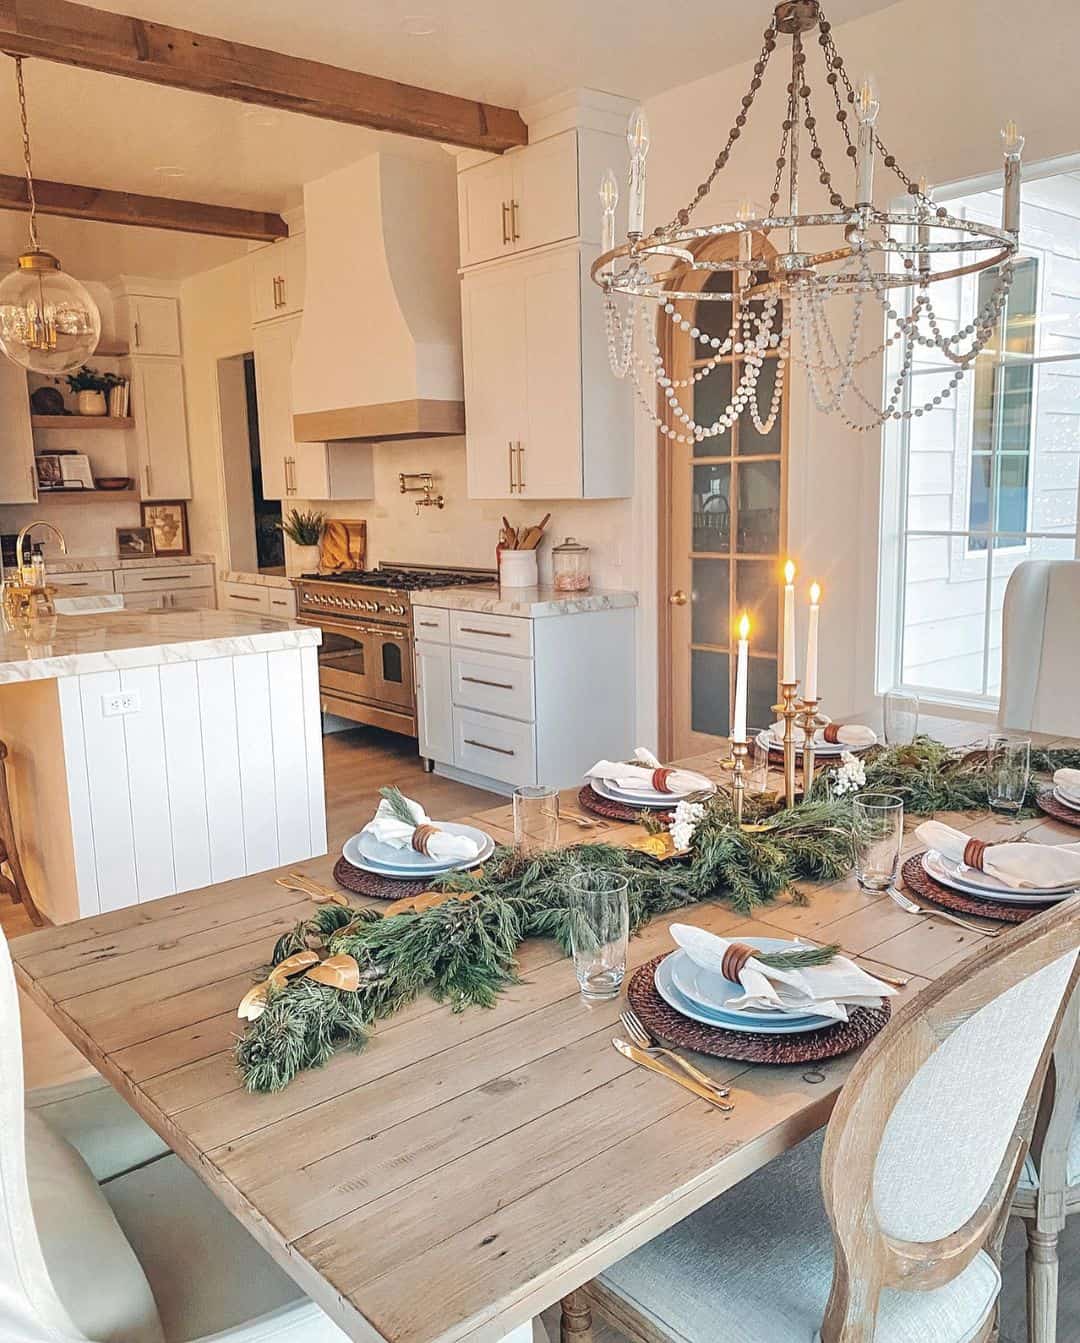 Farmhouse Kitchen Diner with Beamed Ceiling - Soul & Lane